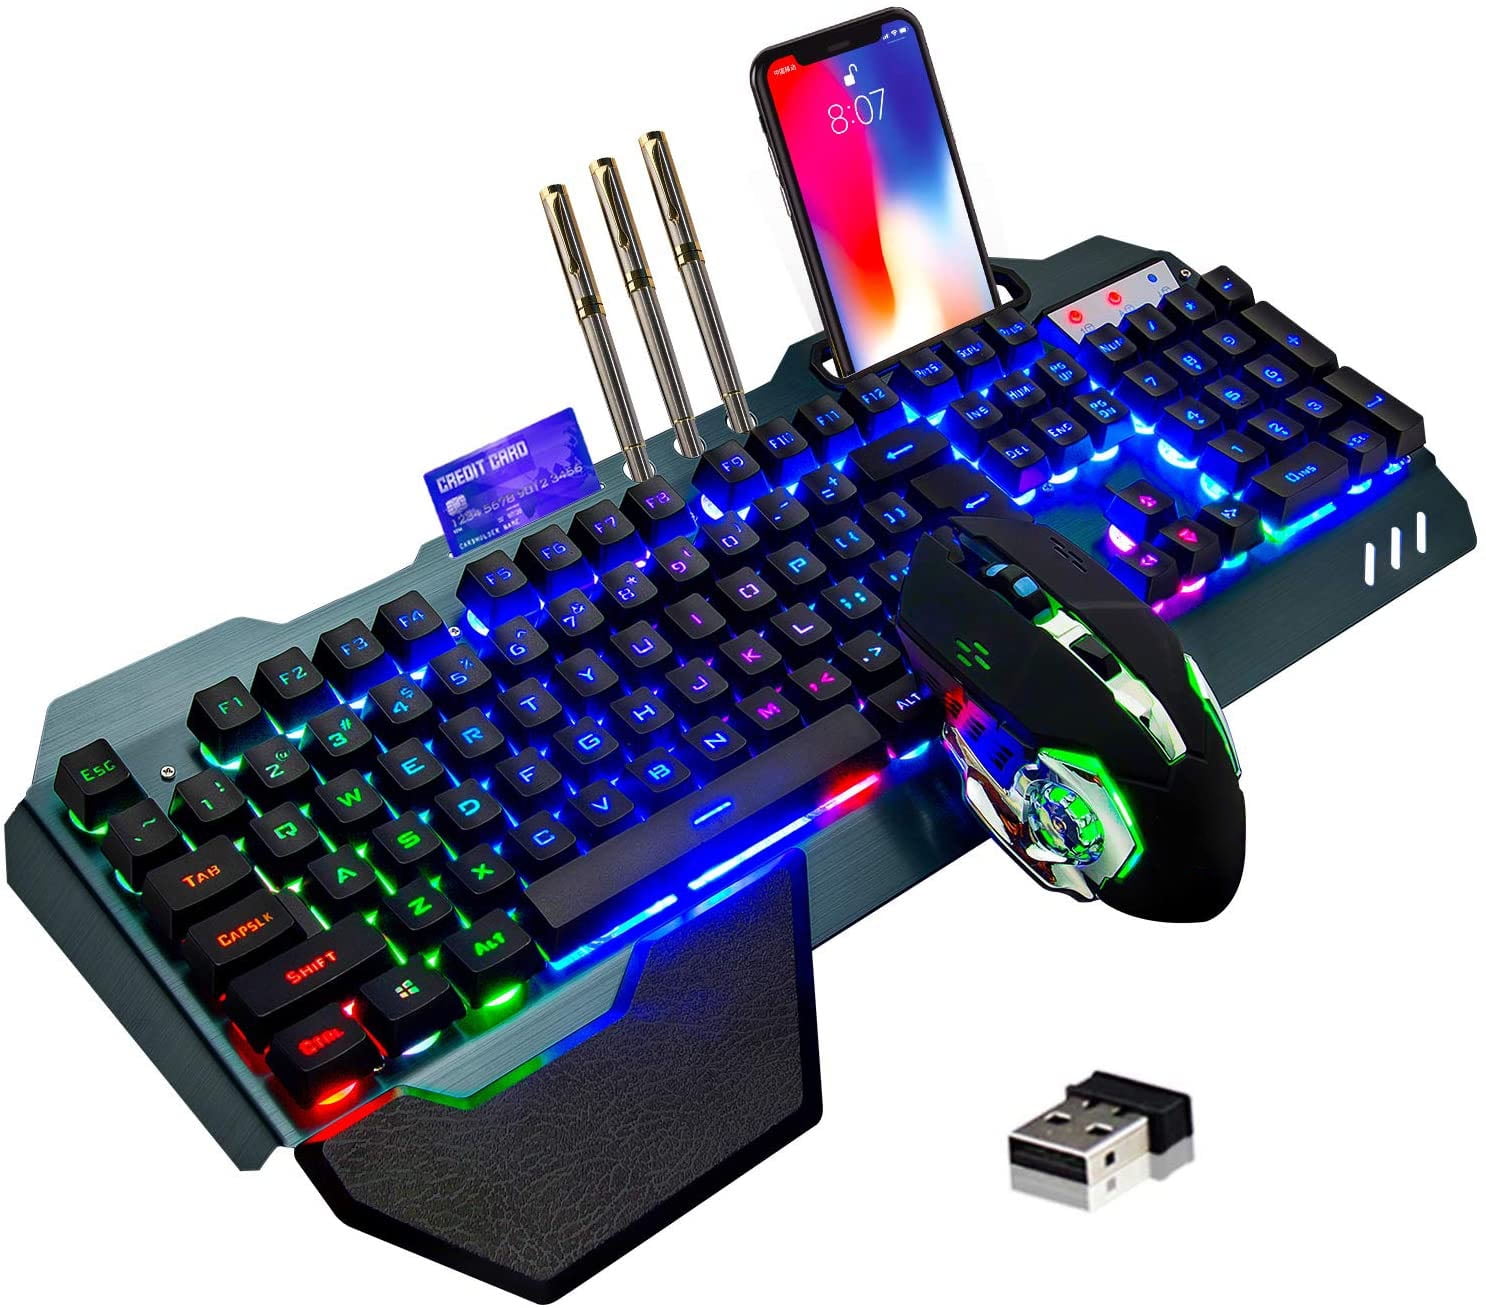 Wireless Gaming Keyboard and Mouse, Rainbow Backlit Rechargeable Keyboard Mouse with 3800mAh Battery Metal Panel, Hand Rest Mechanical Feel Keyboard, and Color Gaming Mouse for PC - Walmart.com